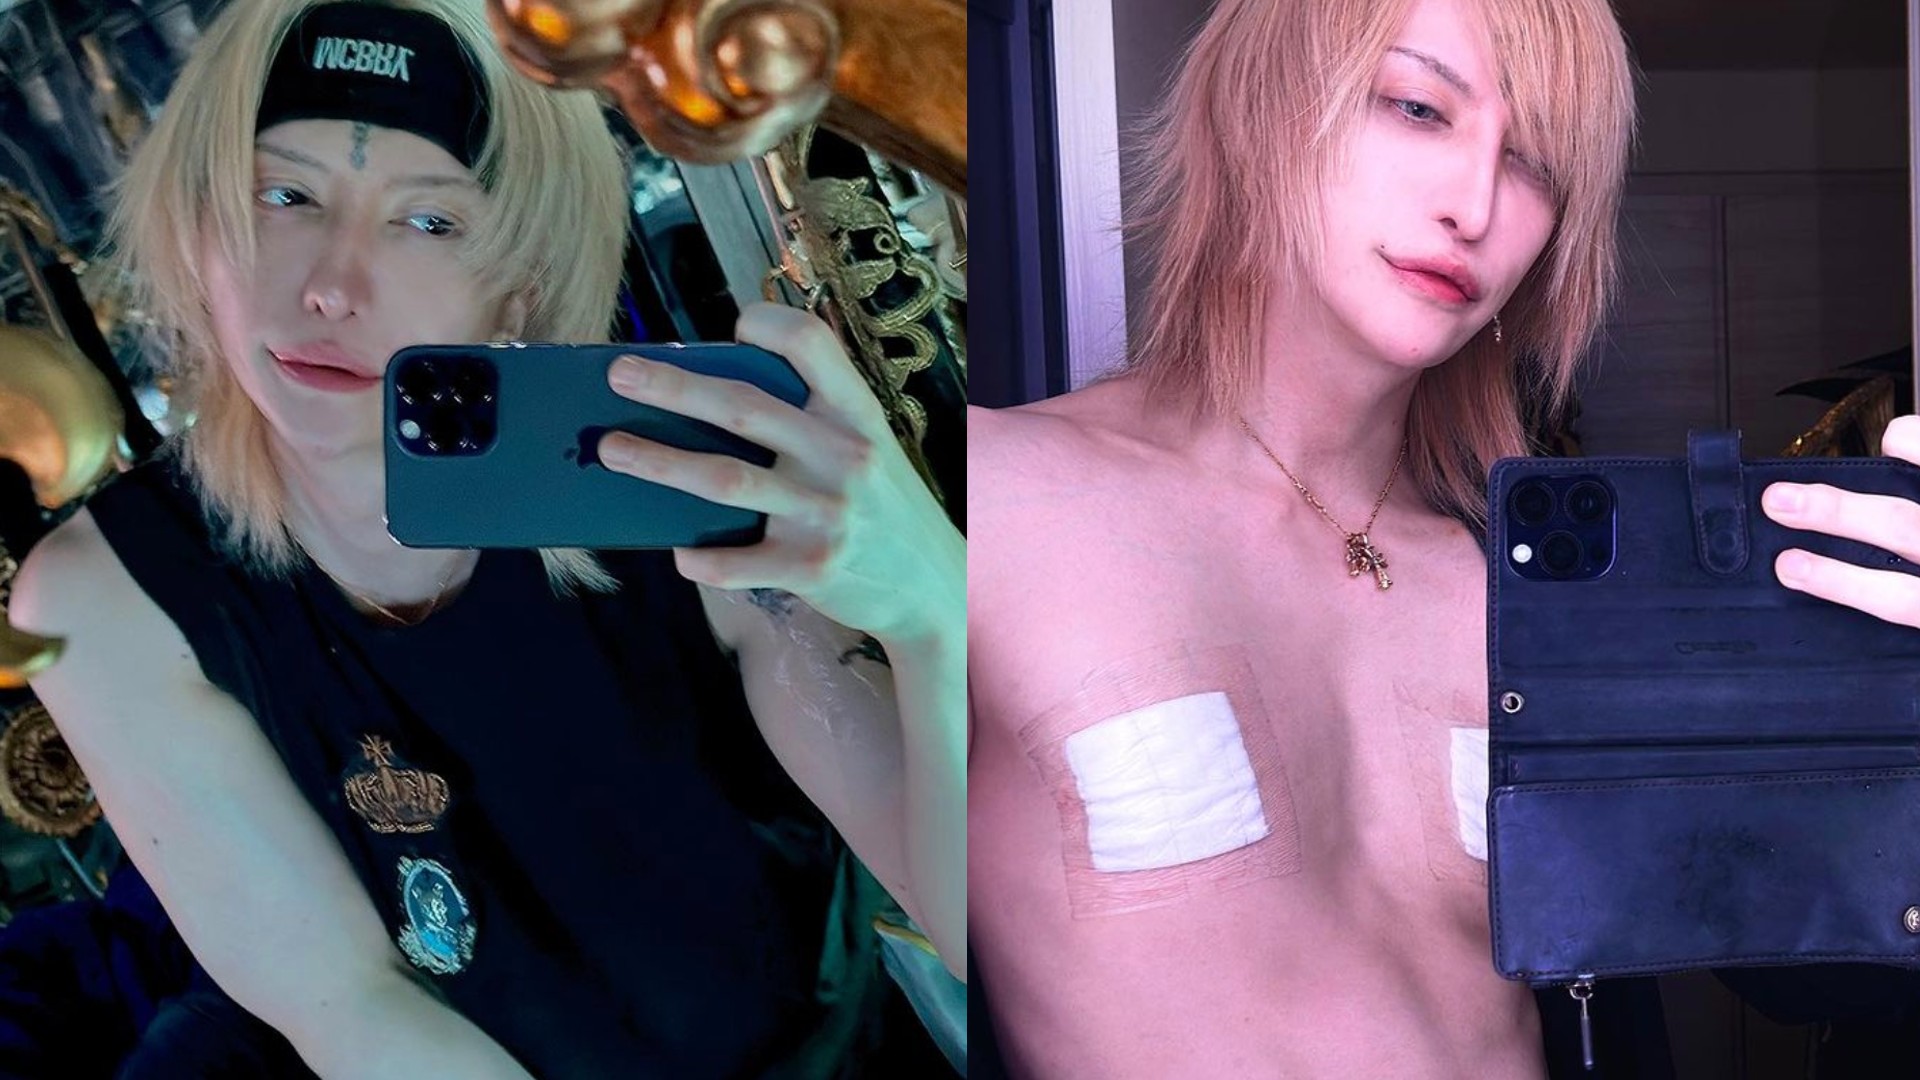 Japanese Guitarist Has Surgery To Remove His Nipples, Says “Men Don't Need  Them” - 8days